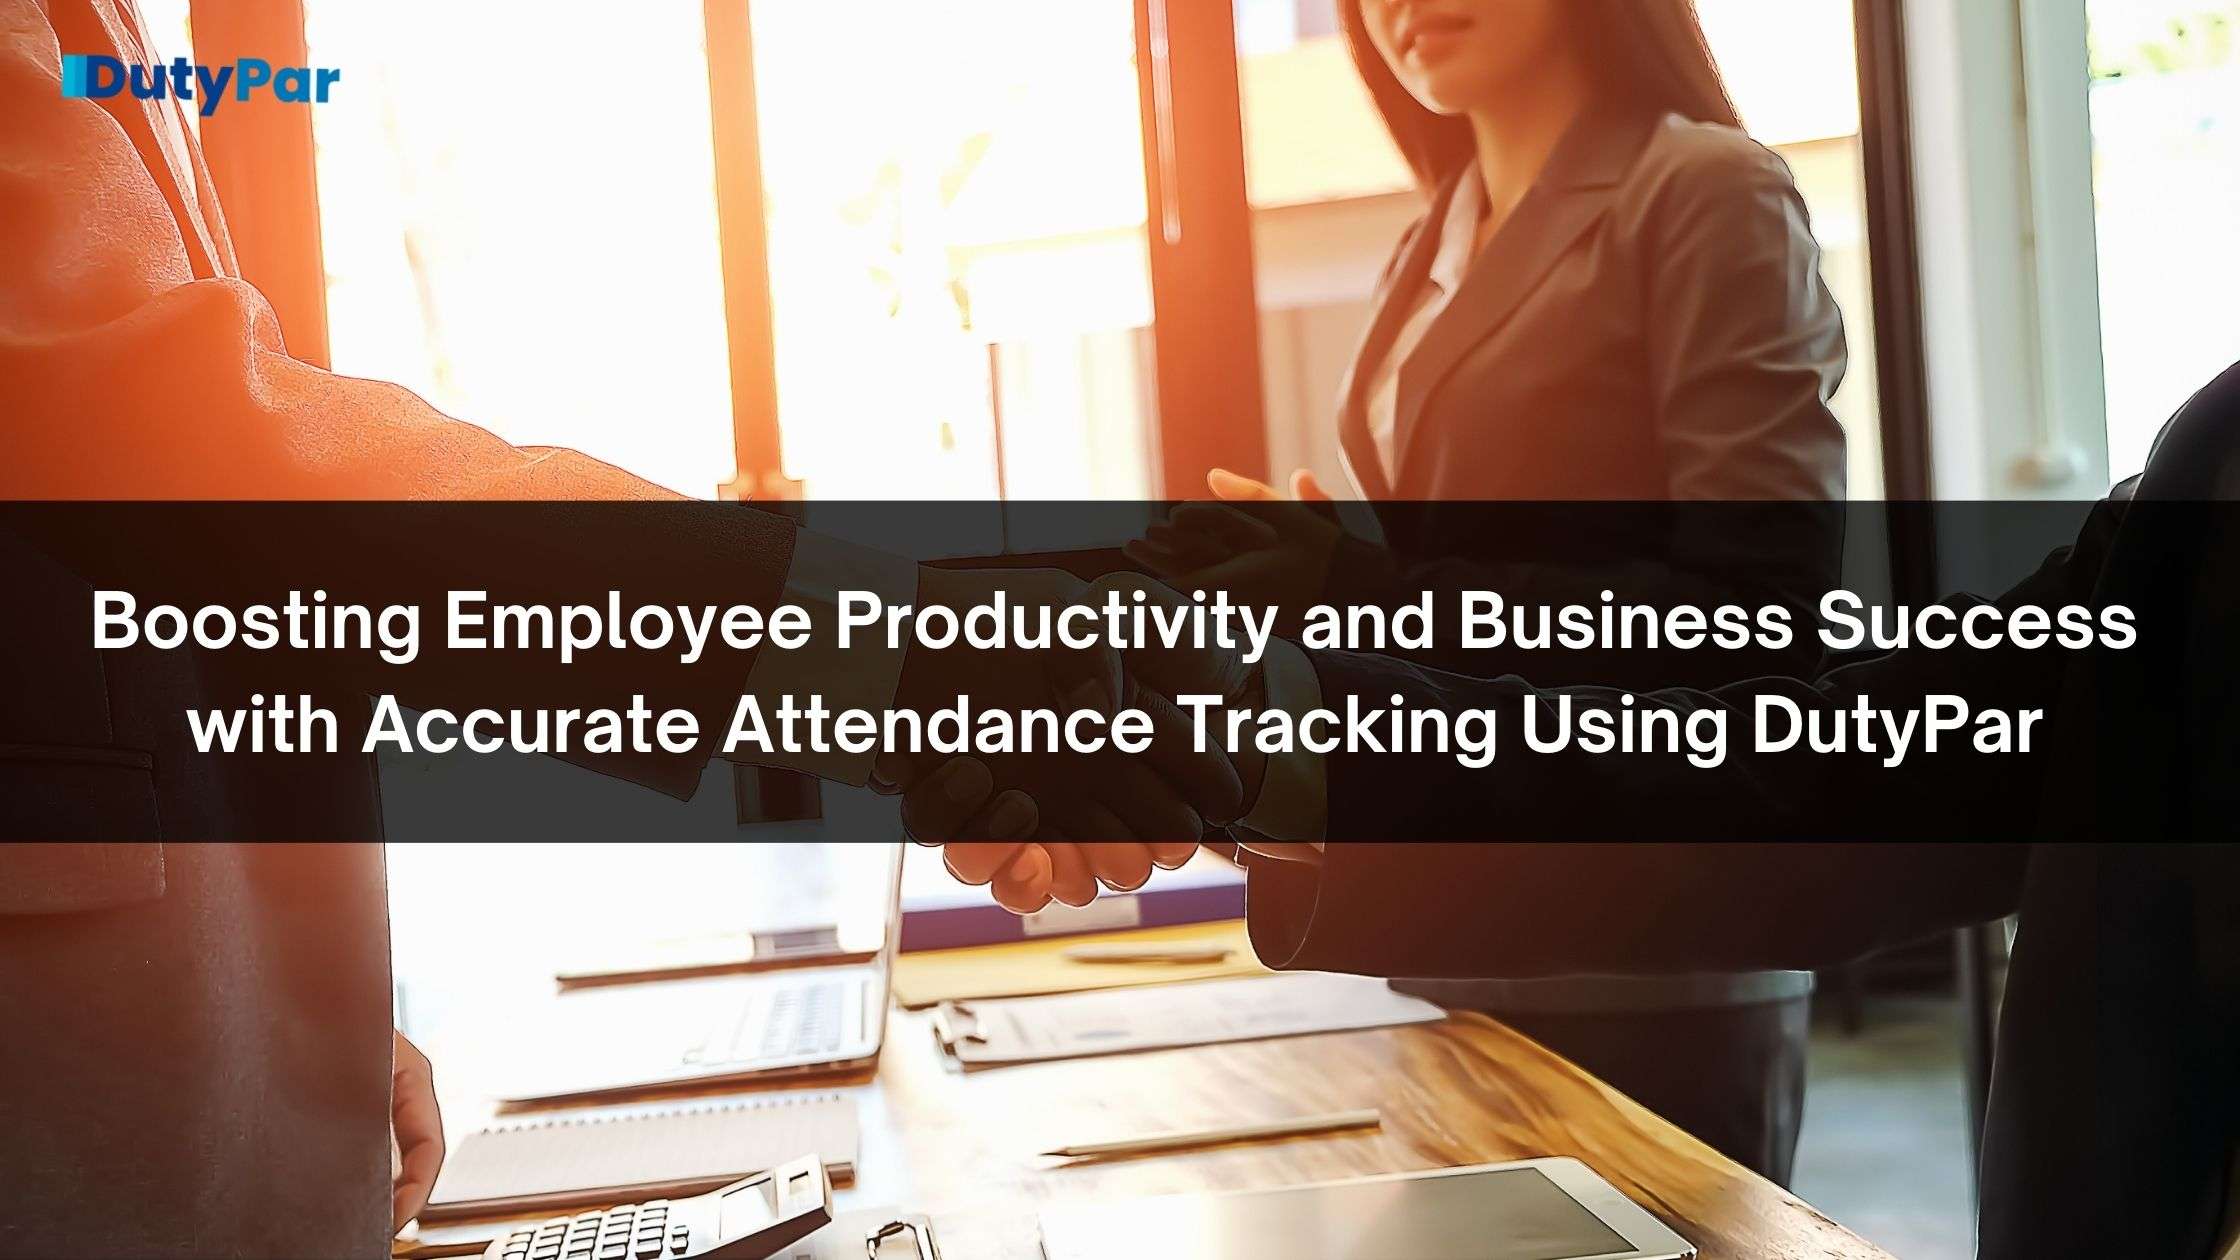 Boosting Employee Productivity and Business Success with Accurate Attendance Tracking Using DutyPar